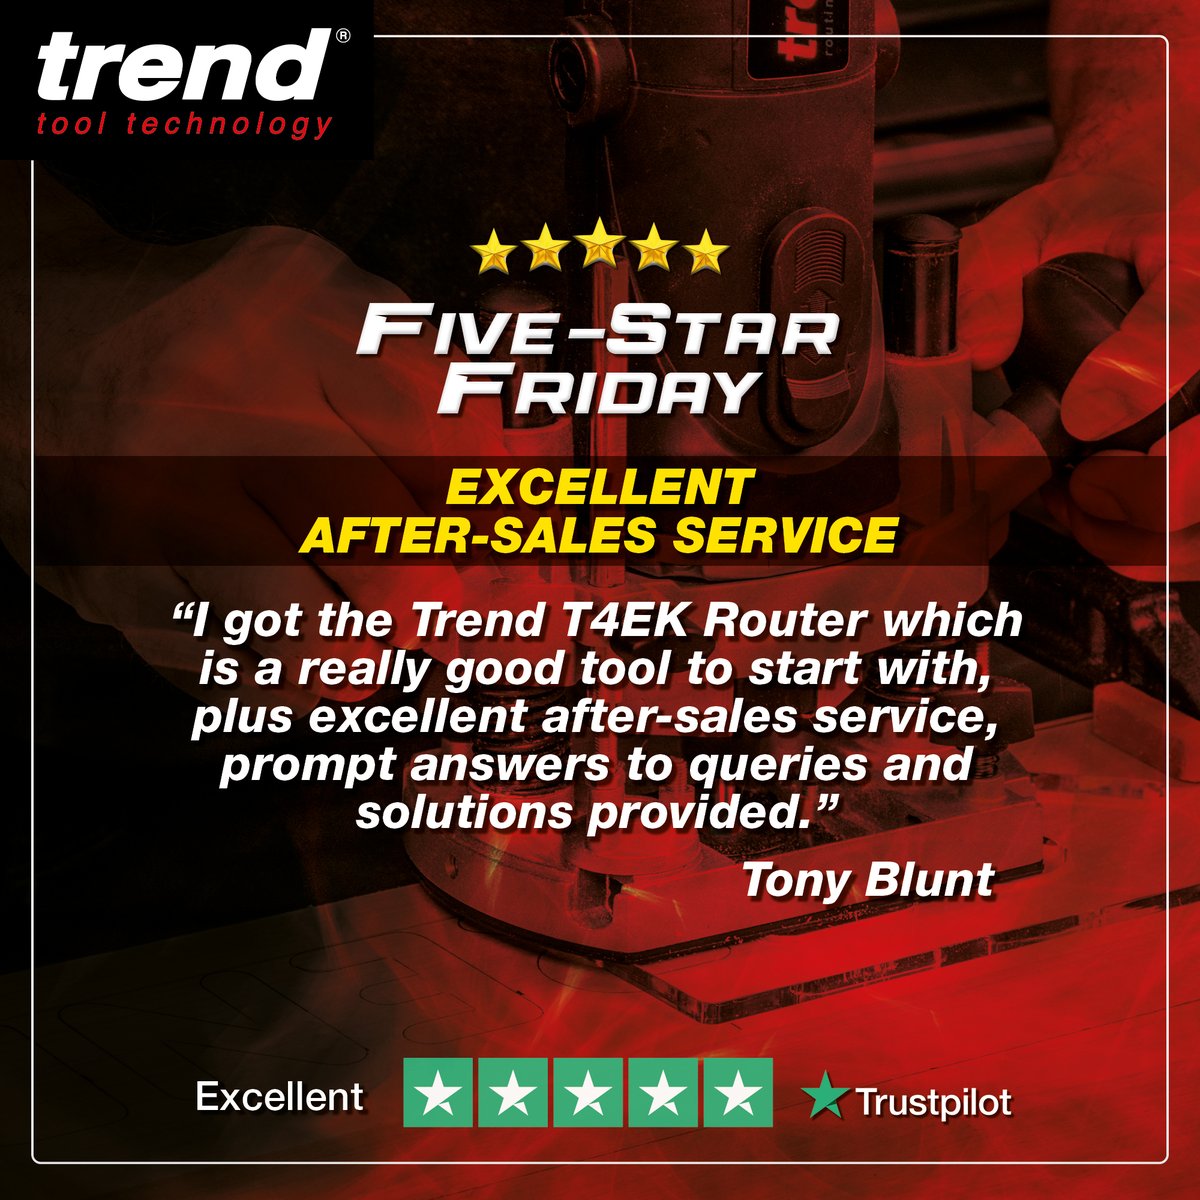 We want you to have a great experience every time you order any of our innovative solutions. Our customer service team is always happy to help you get the most out of your purchases. Contact us today if you have any product or service-related queries. trend-uk.com/technical-supp…